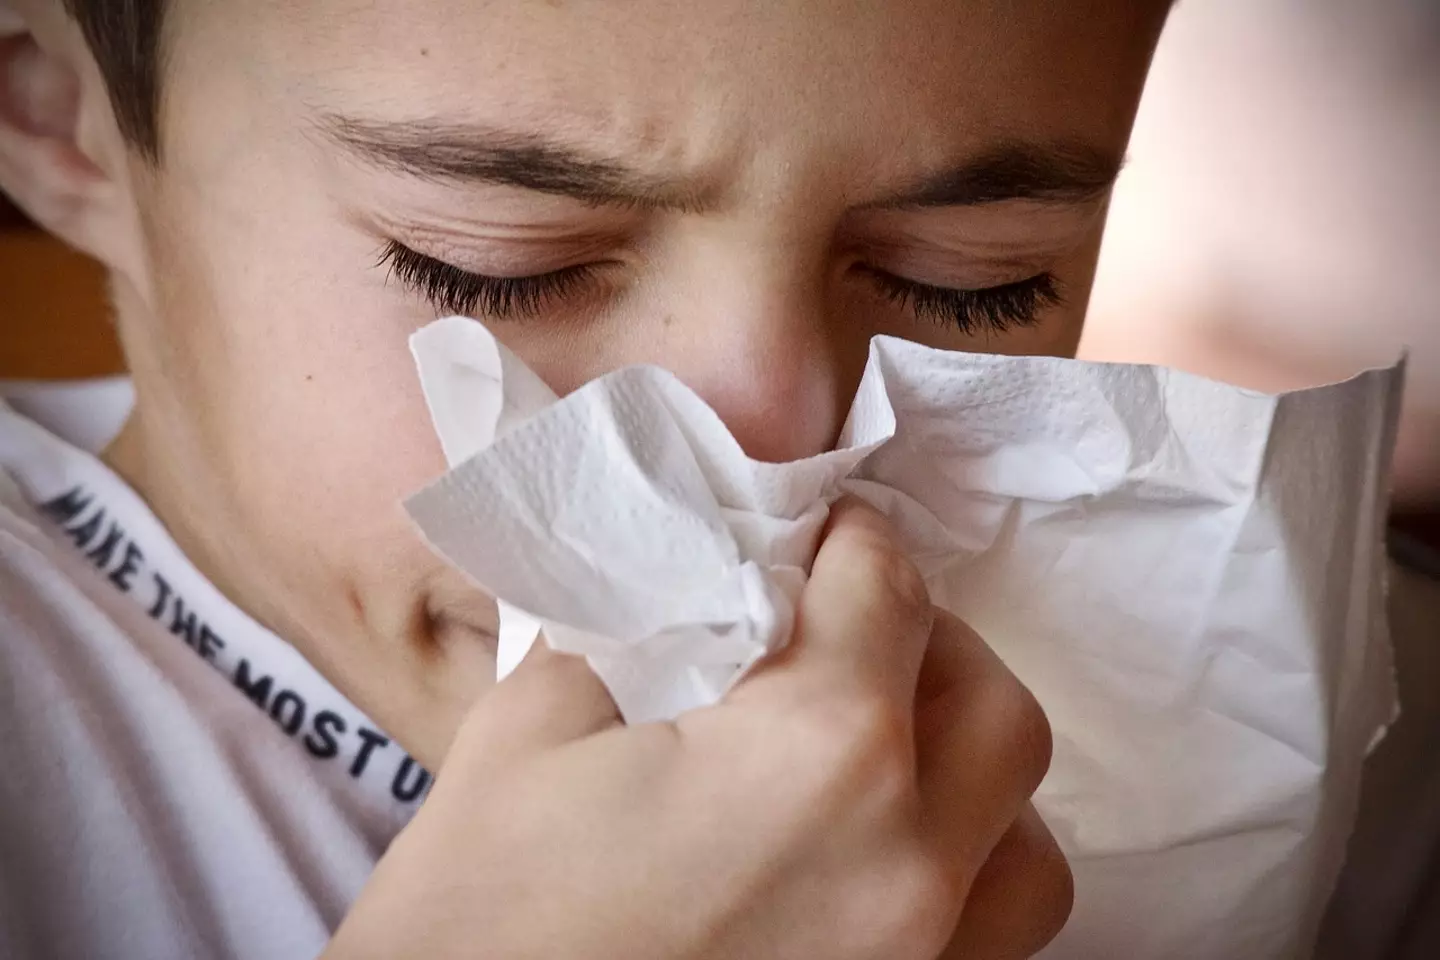 The NHS warns that younger children and babies are more at risk of whooping cough complications.